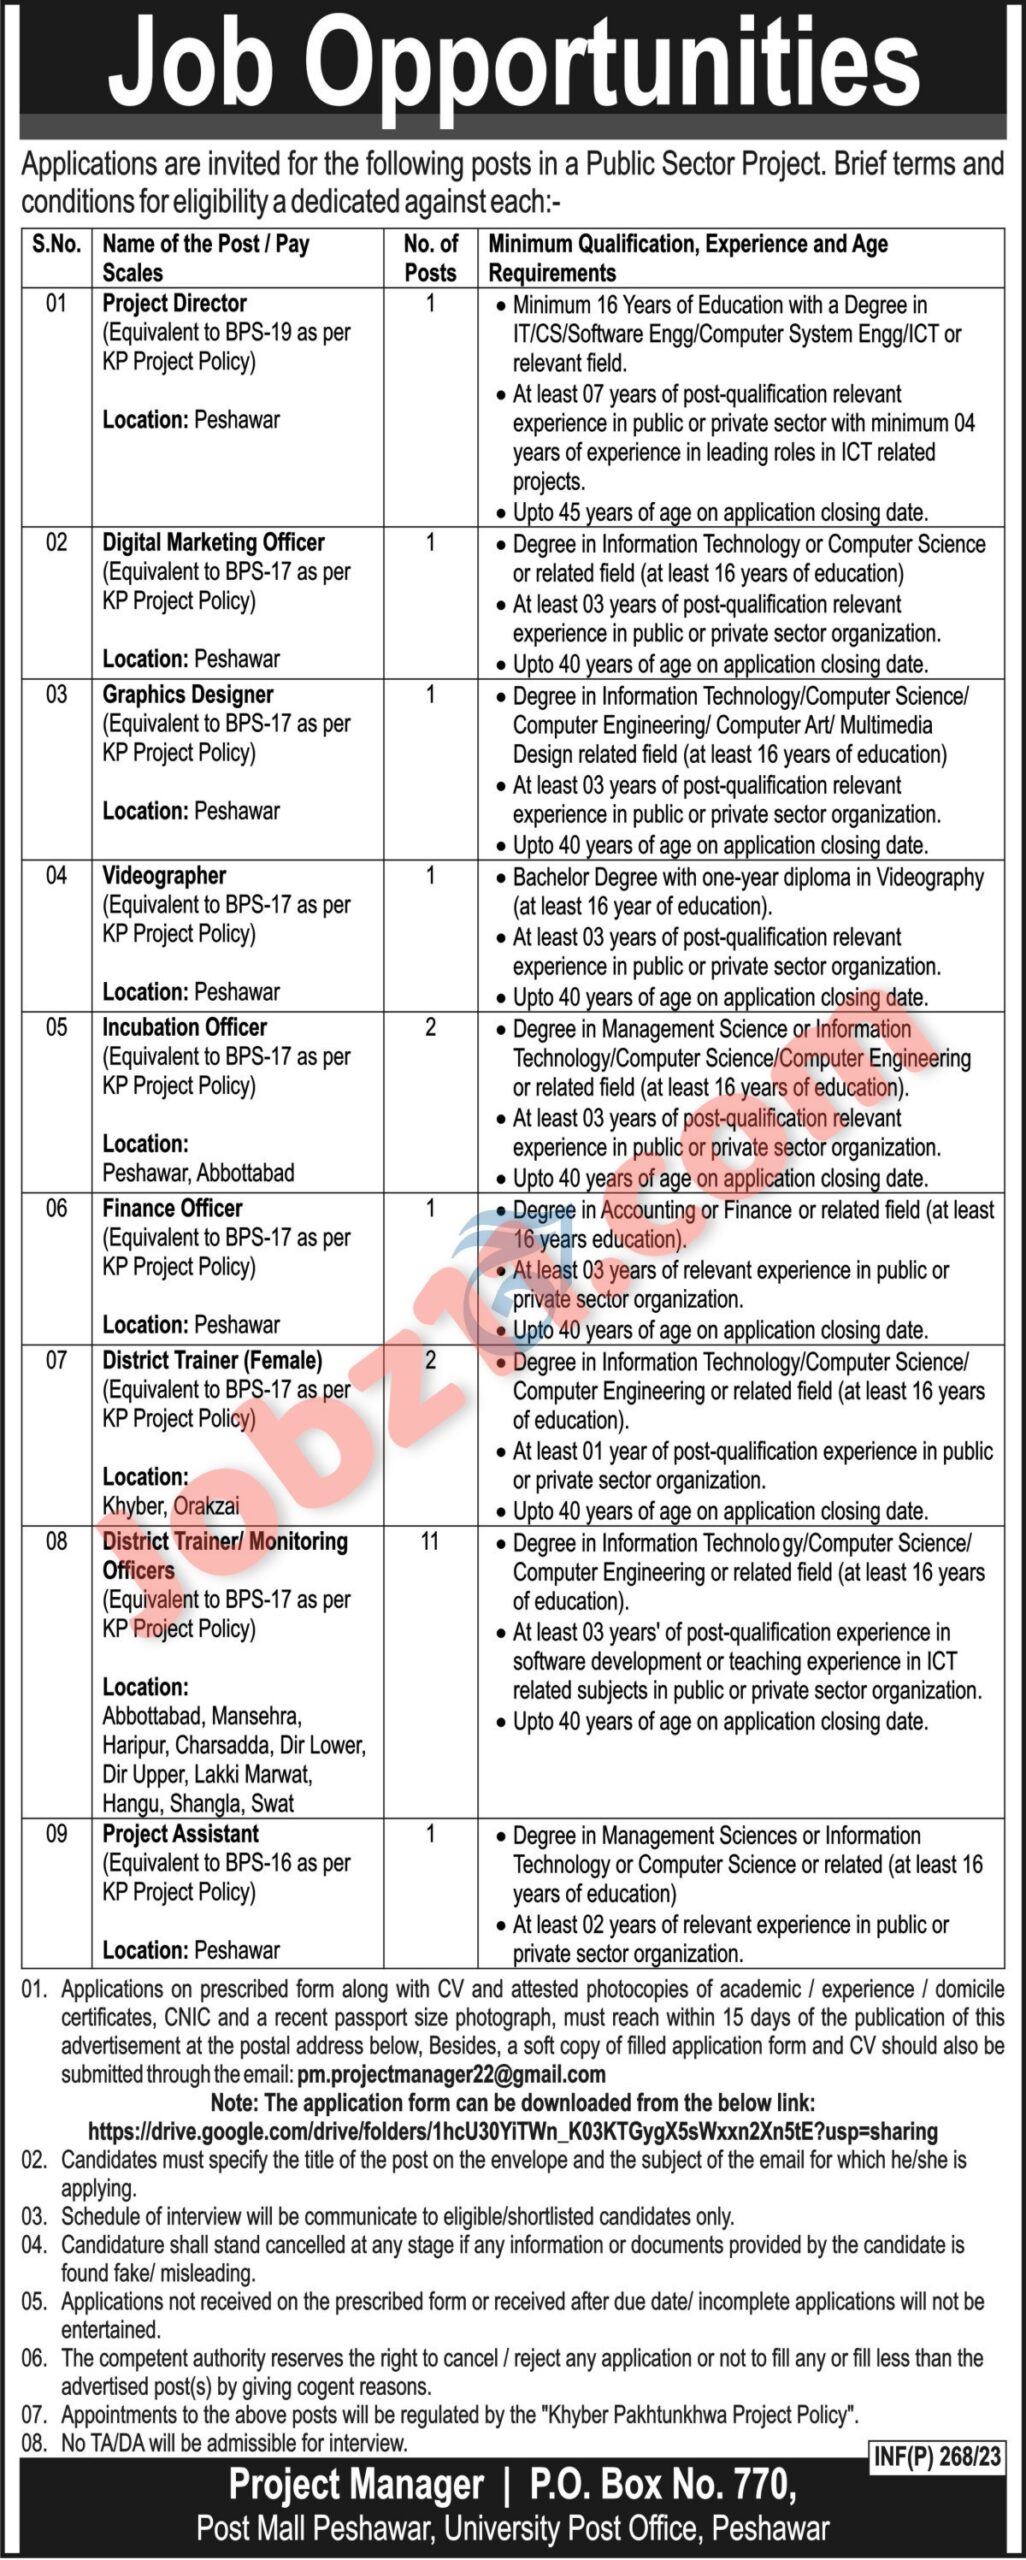 Public Sector Project Jobs 2023 Directors, Officers, Trainers and Assistants